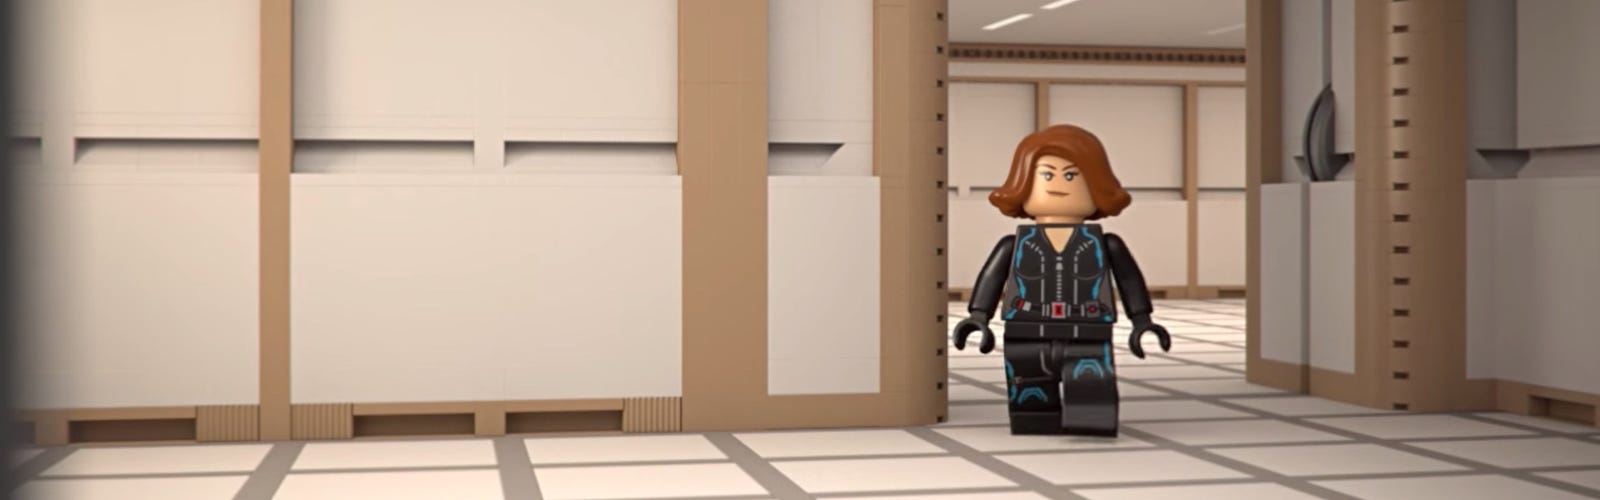 Snart sej presse Black Widow | Characters | LEGO Marvel | Official LEGO® Shop BE